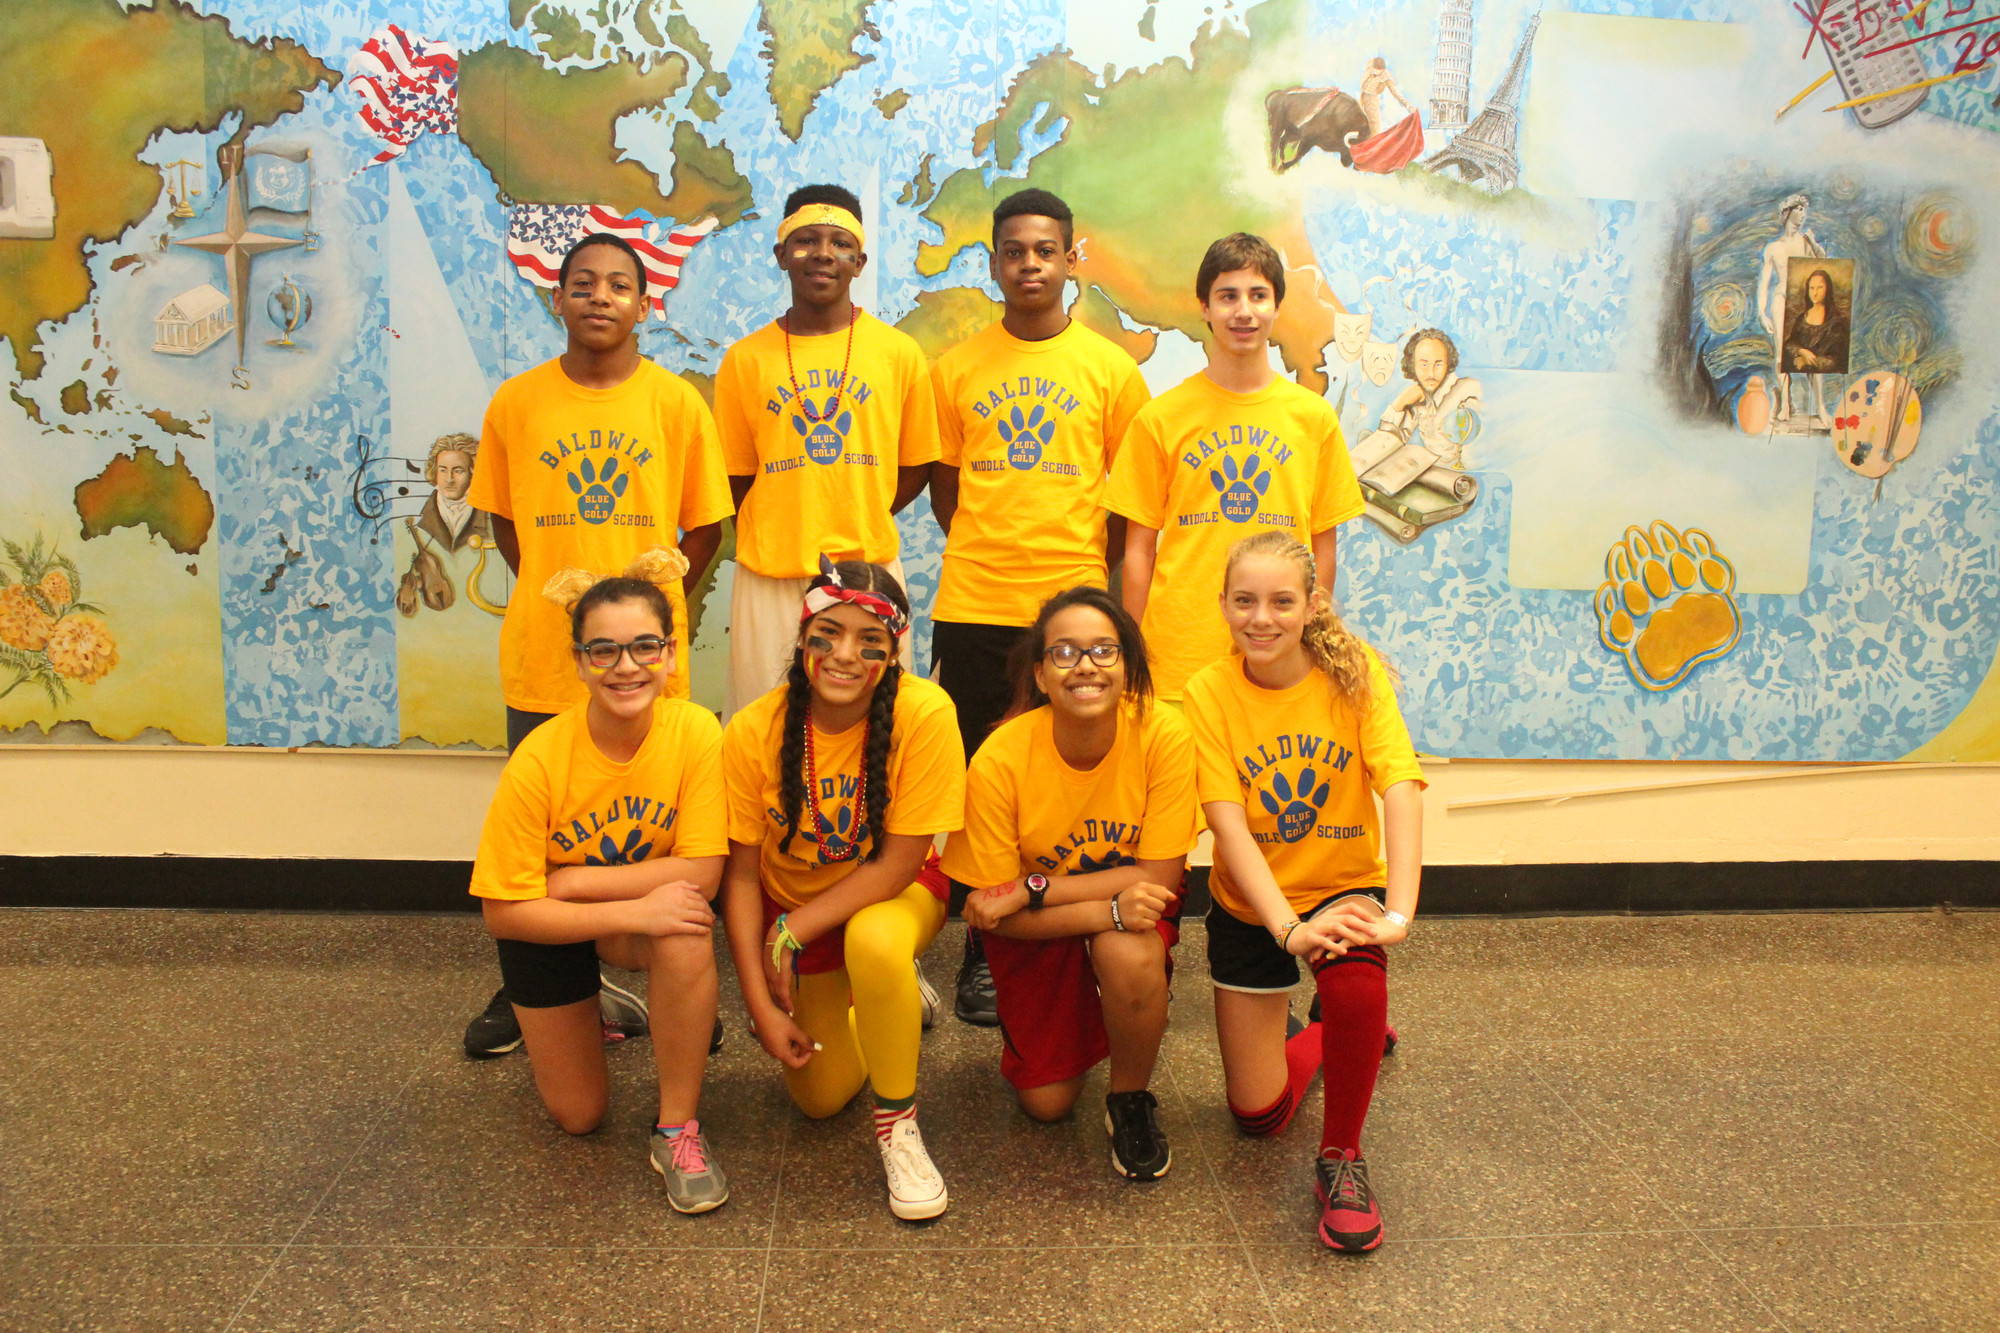 Gold Team captains front row, from left, Sofie Nester, Kayla Vega, Arielle Savoy and Lindsay Hurley; back row from left, William Evans, Messiah Floyd-Gordon, Segun Greene and Brian Scannell.